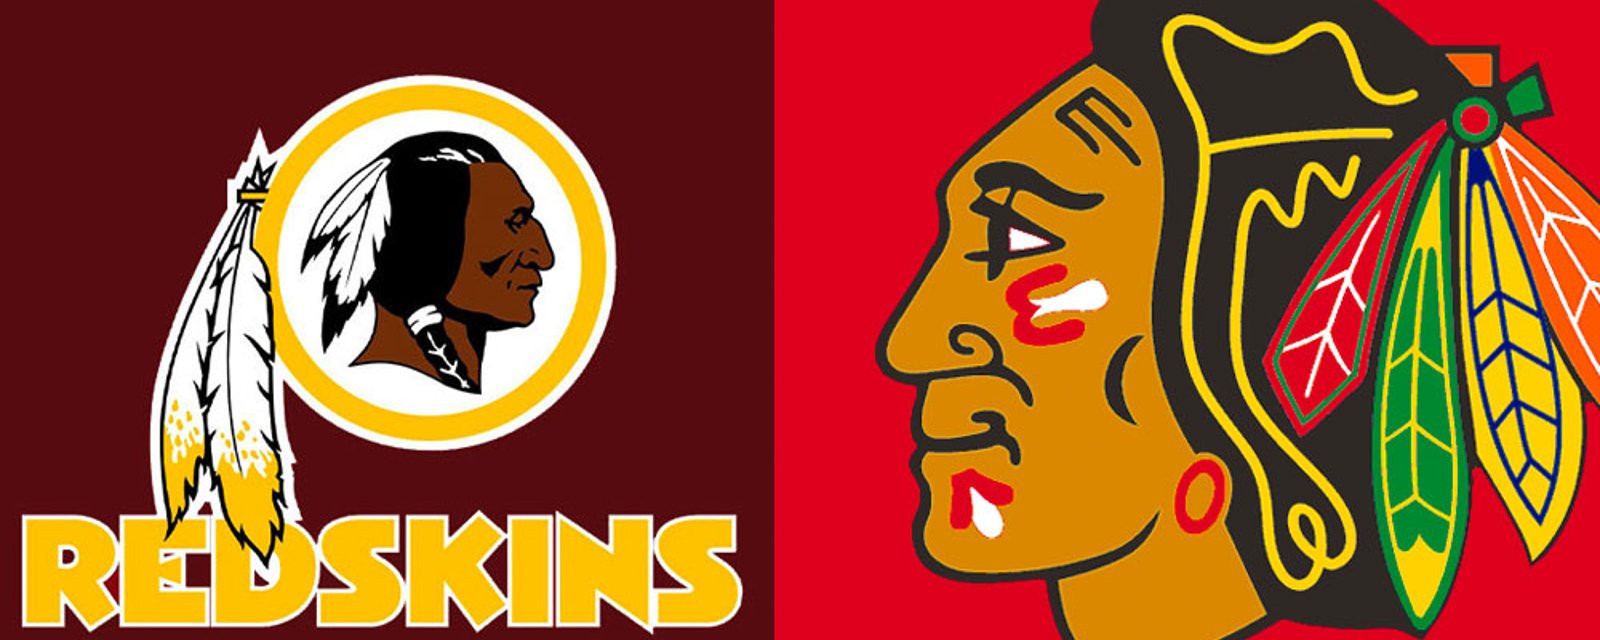 NFL’s Redkins will review team name: Hawks to follow suit? 